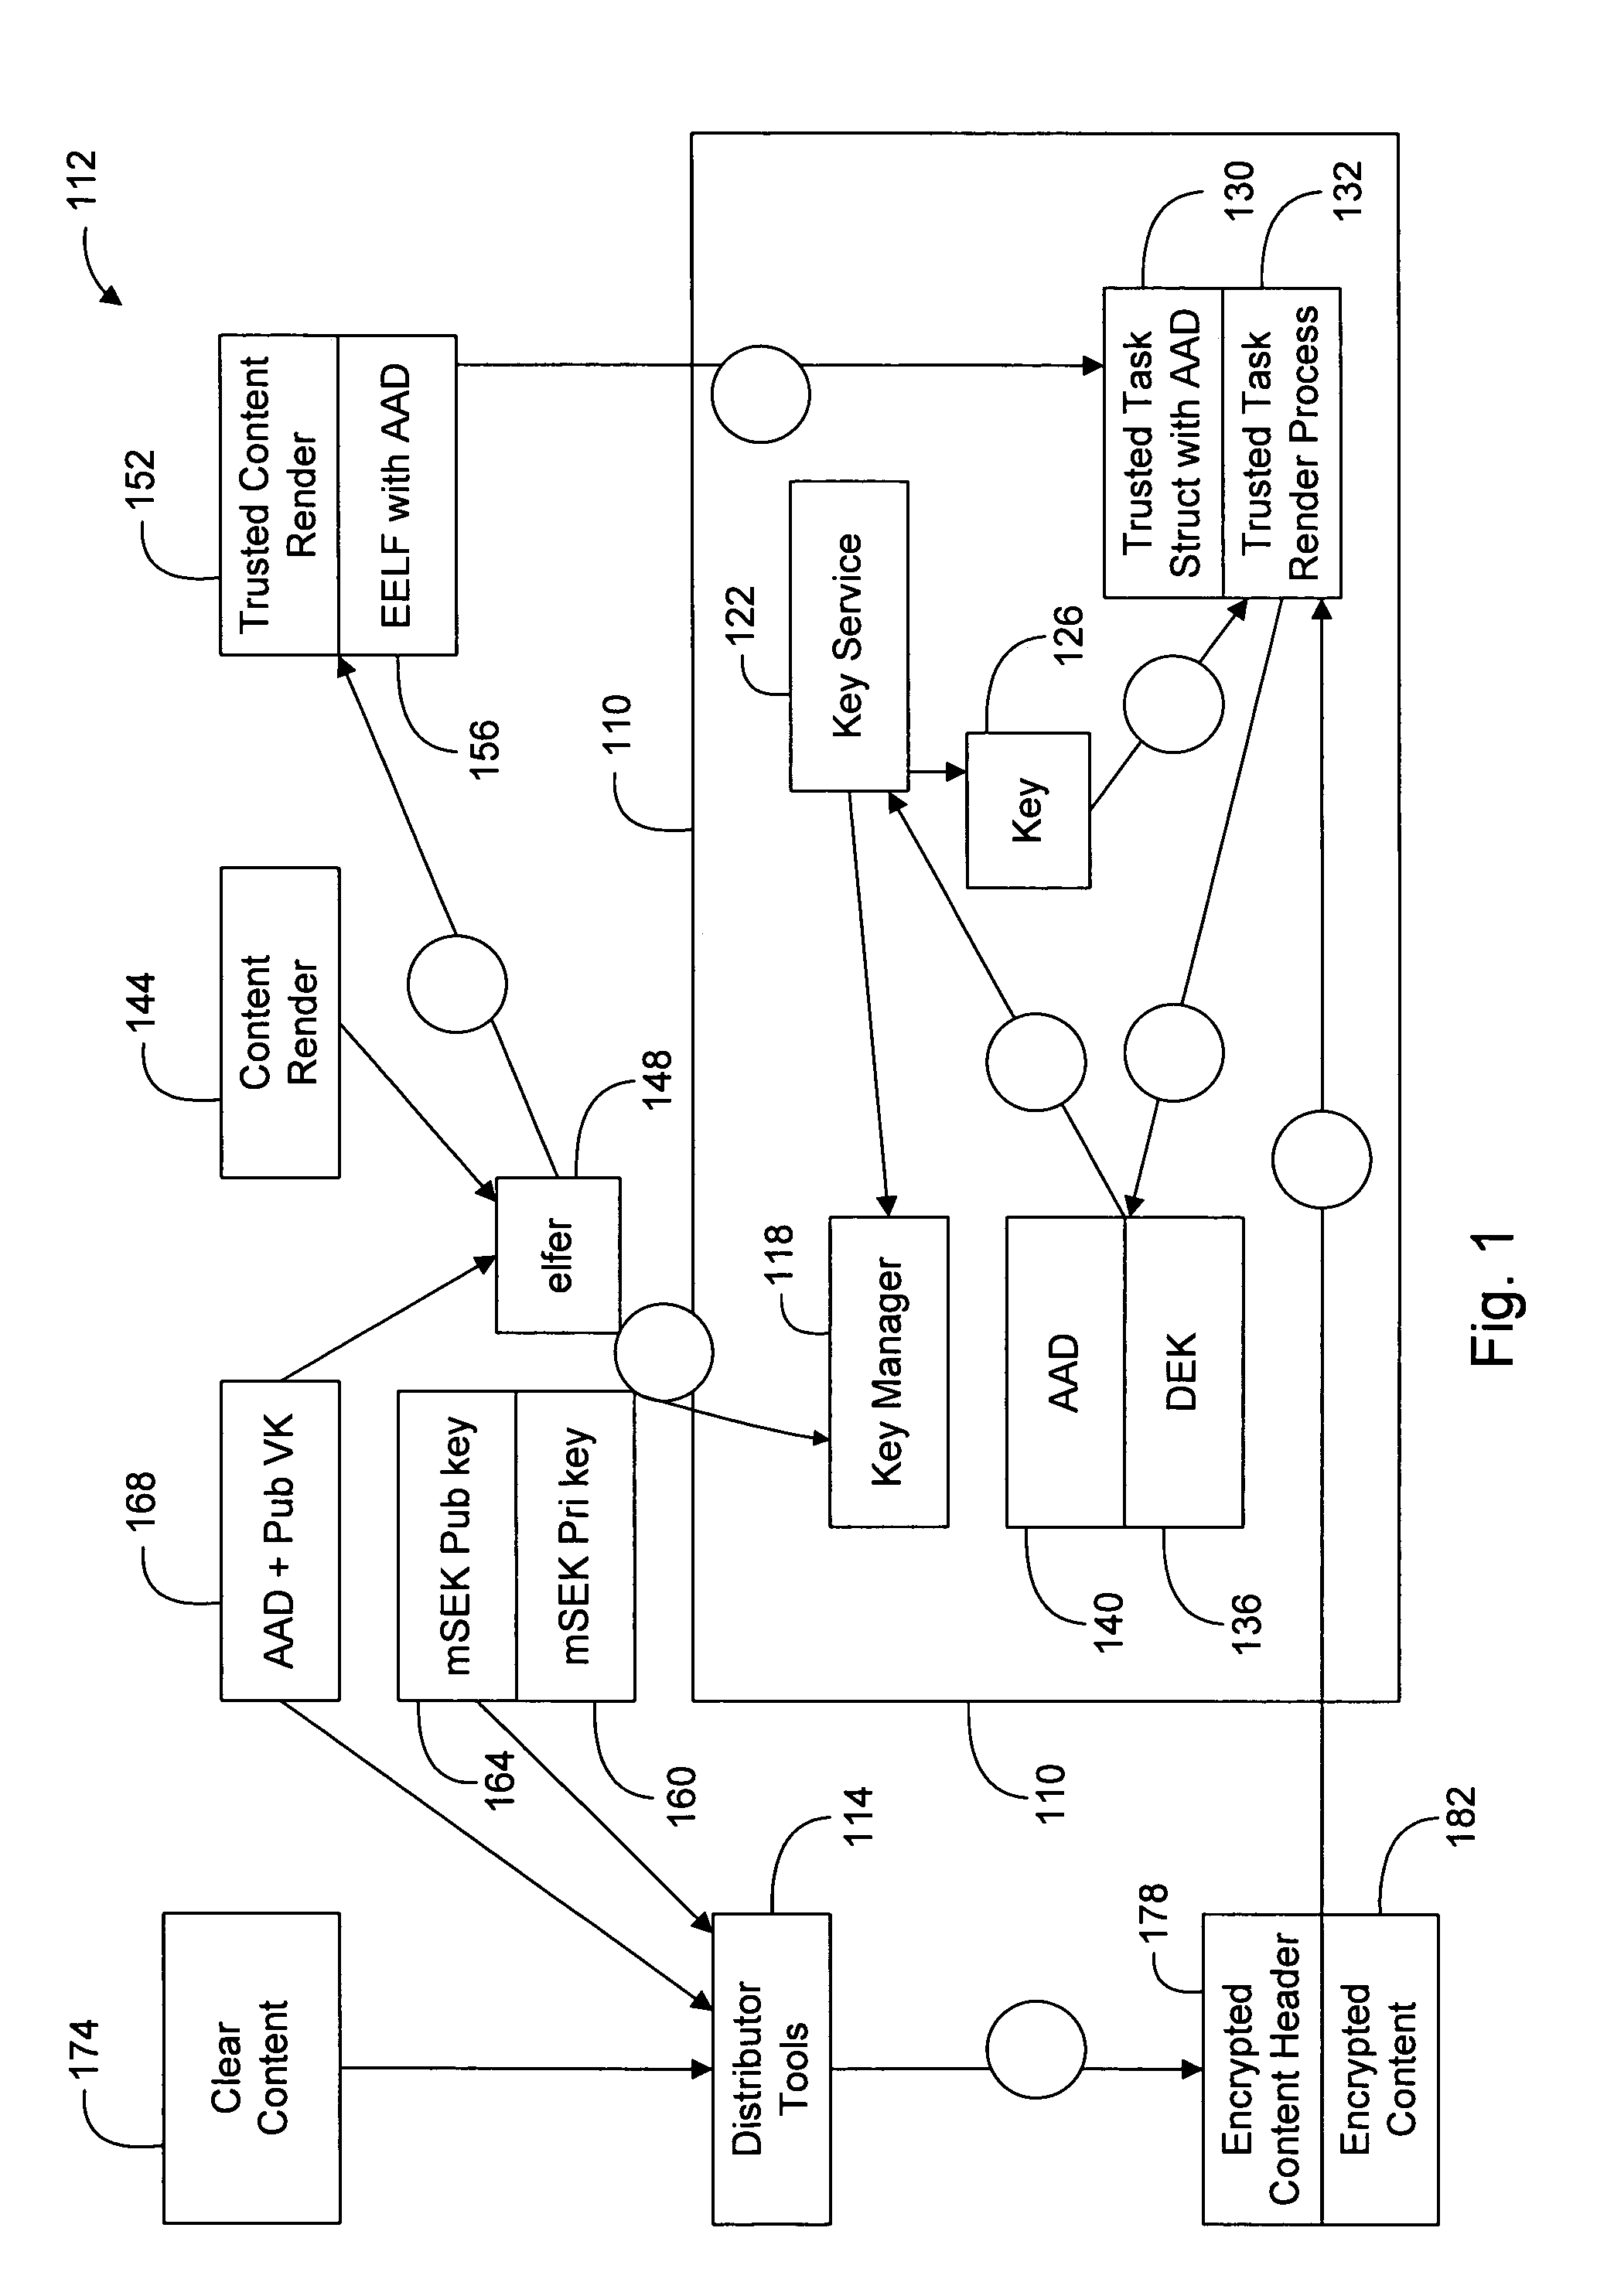 System and method for authorizing the use of stored information in an operating system